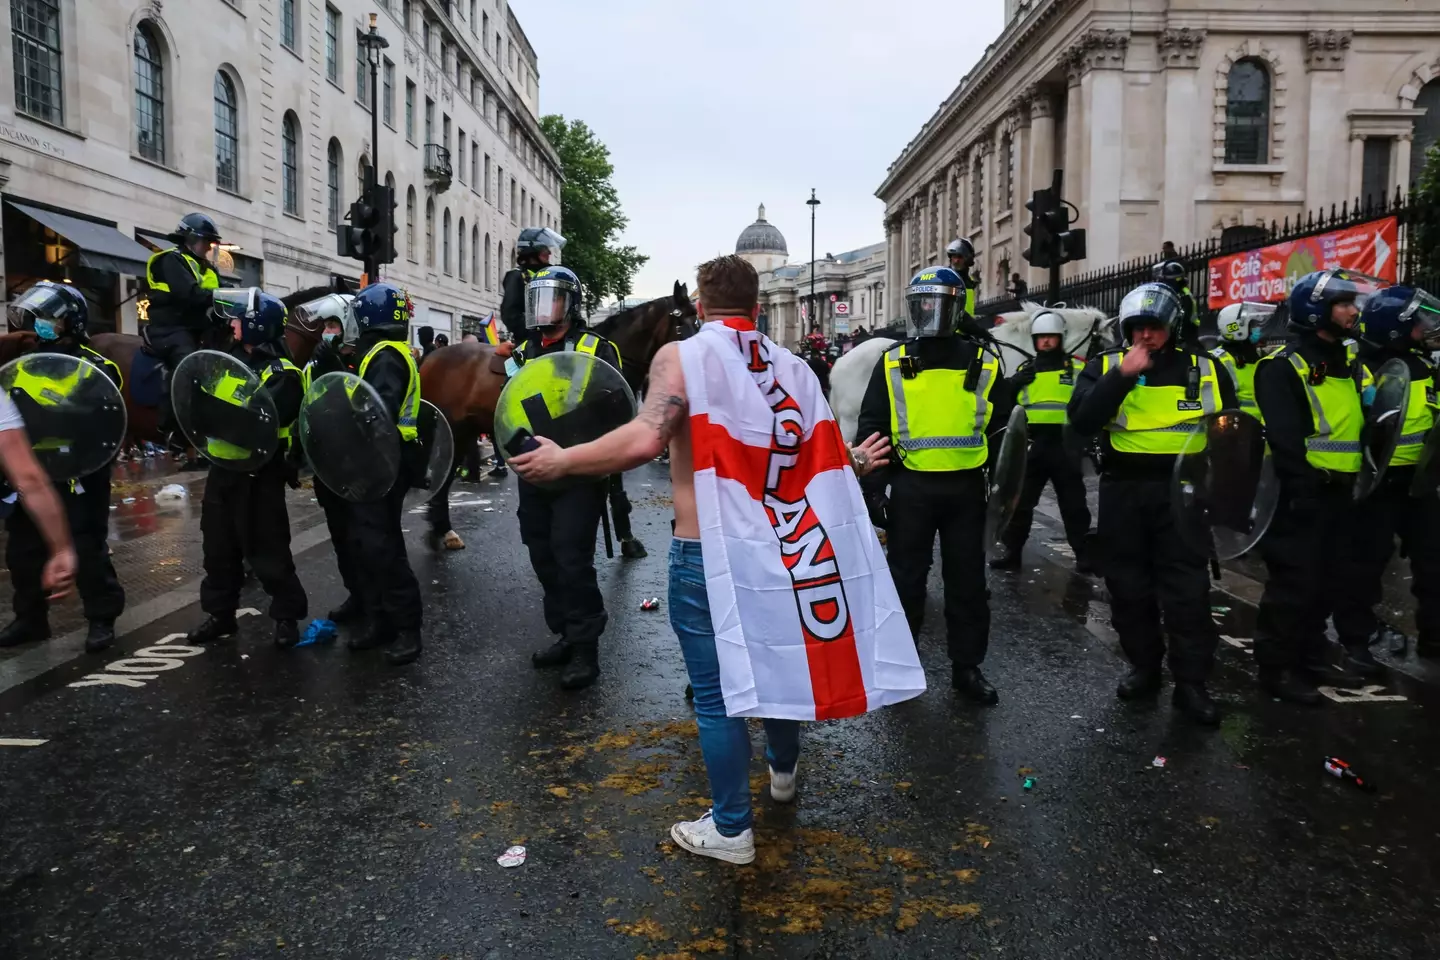 England fans were criticised following the Euro 2020 final last year.